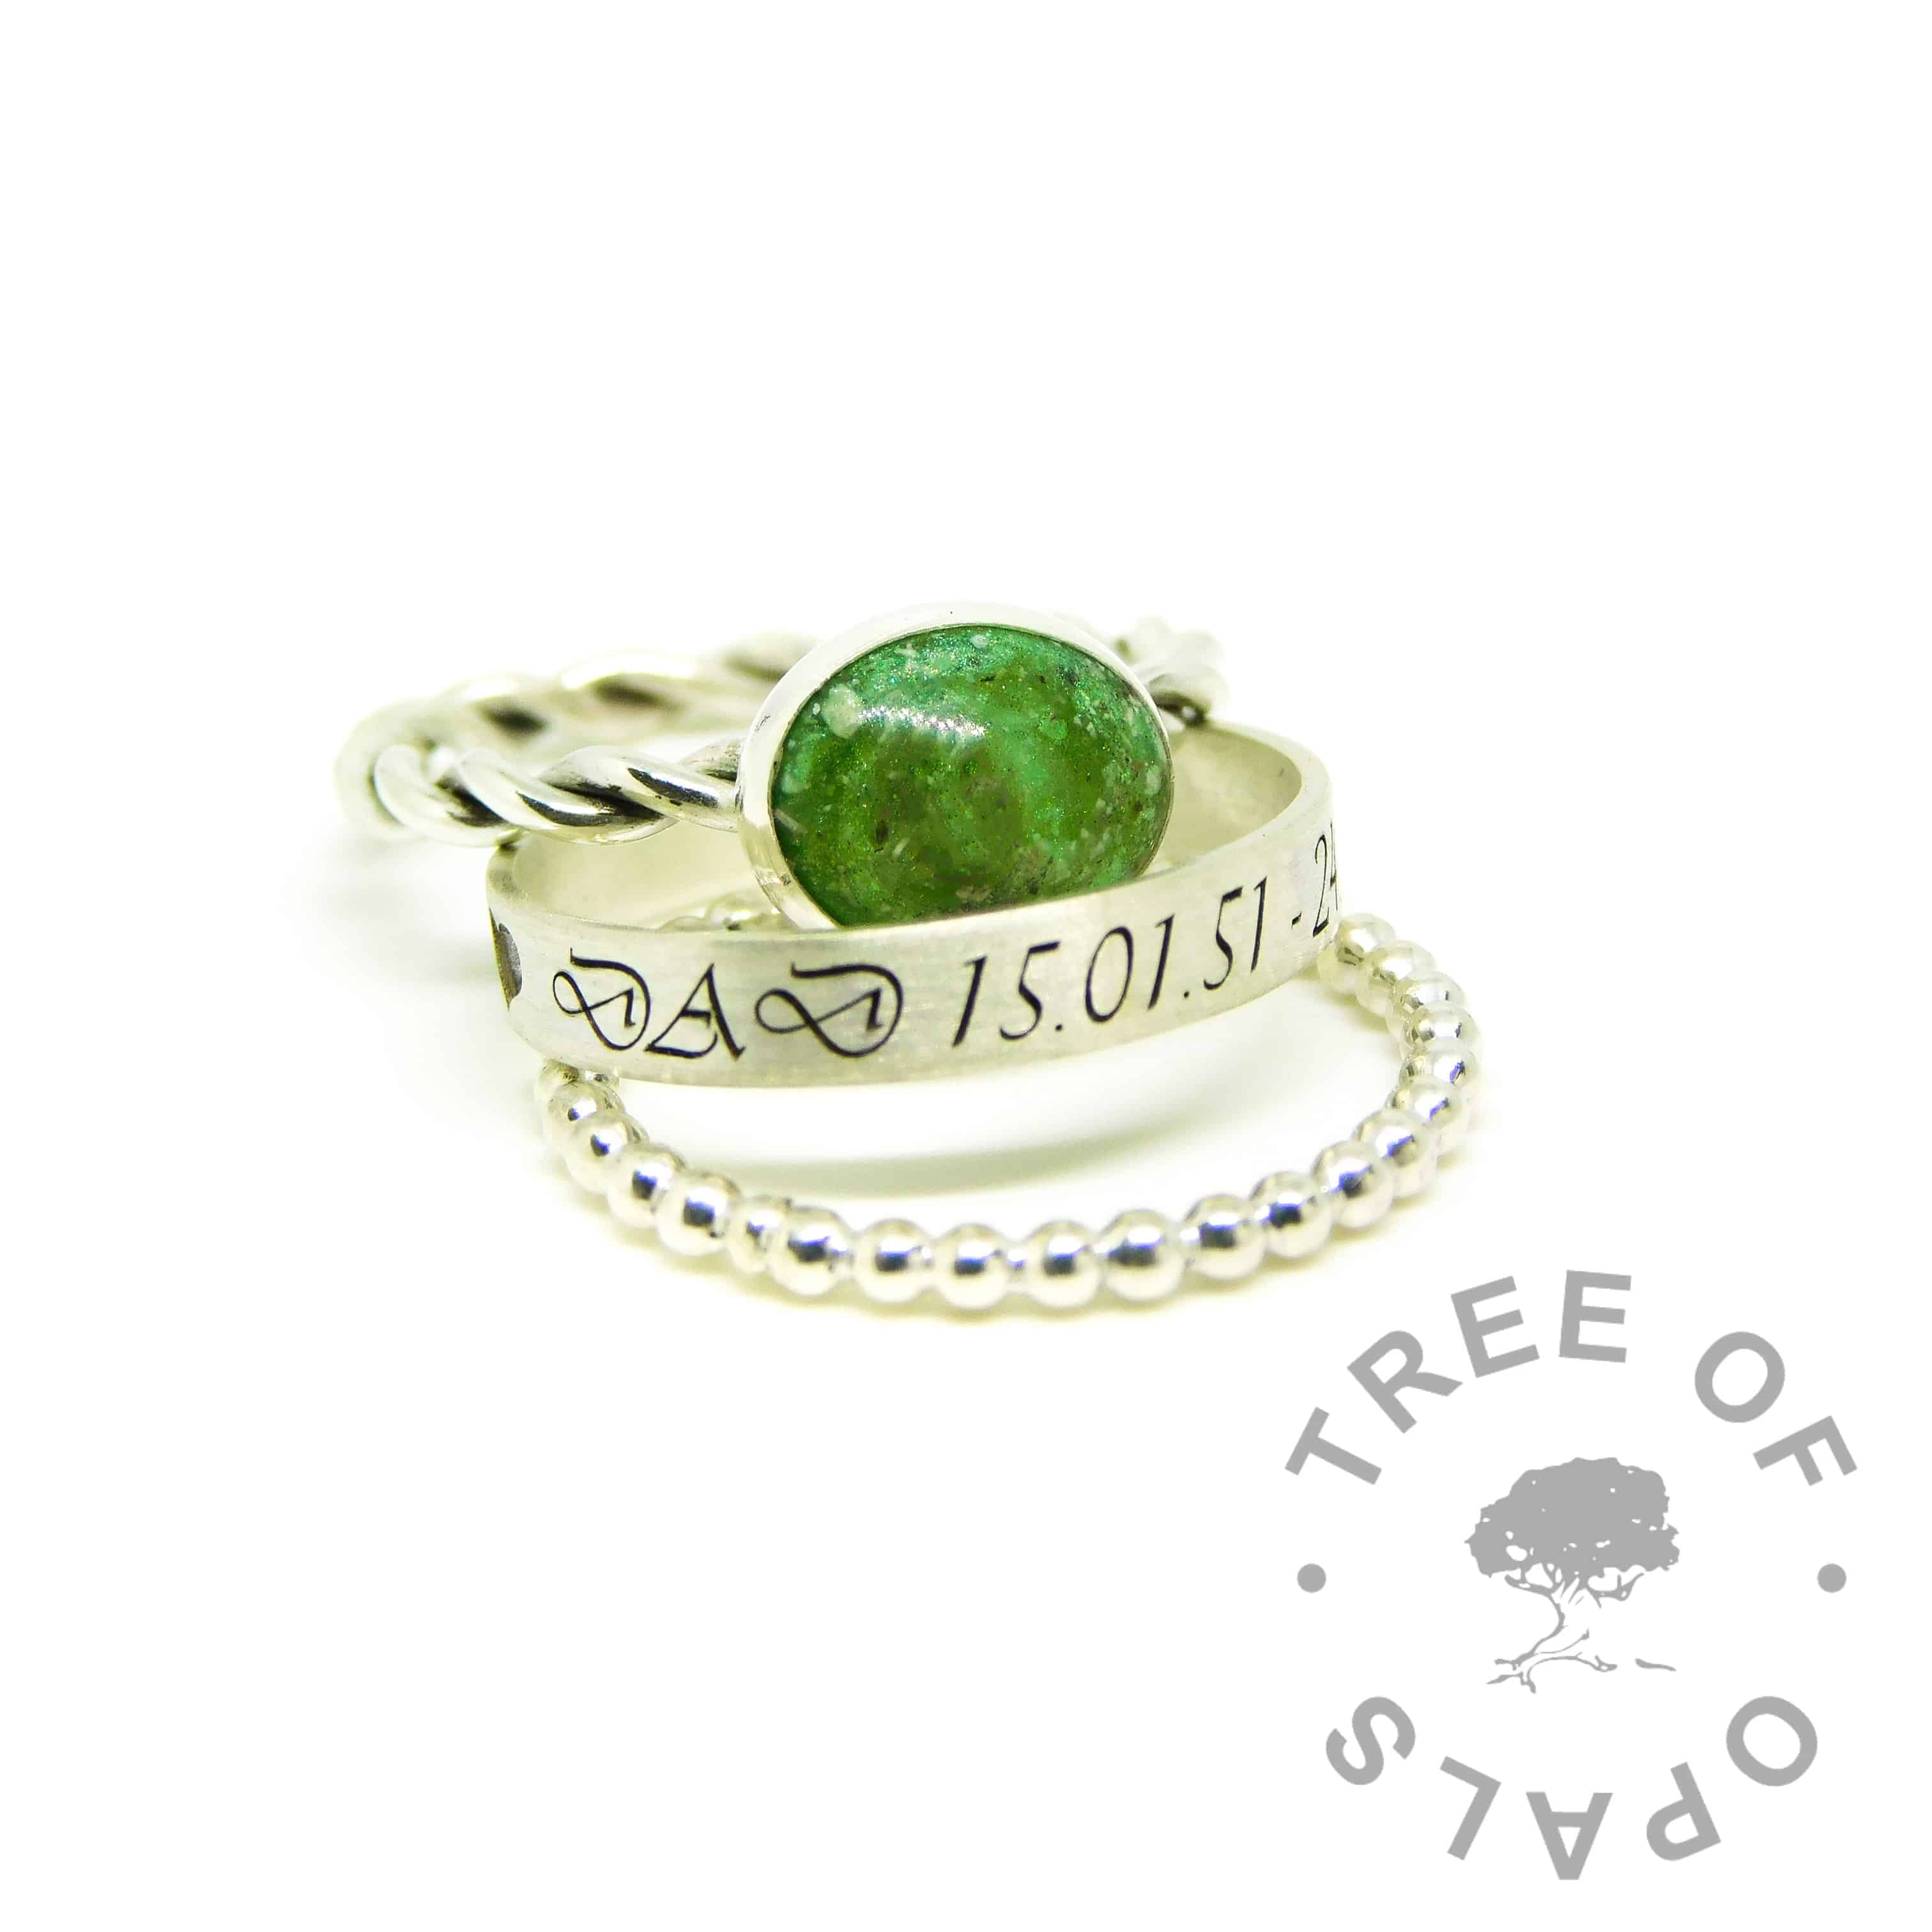 ashes jewellery rings, engraved 3mm brushed band with allcaps Vivaldi font on the outside of the band, bubble wire stacking ring, basilisk green resin ashes ring on twisted wire band